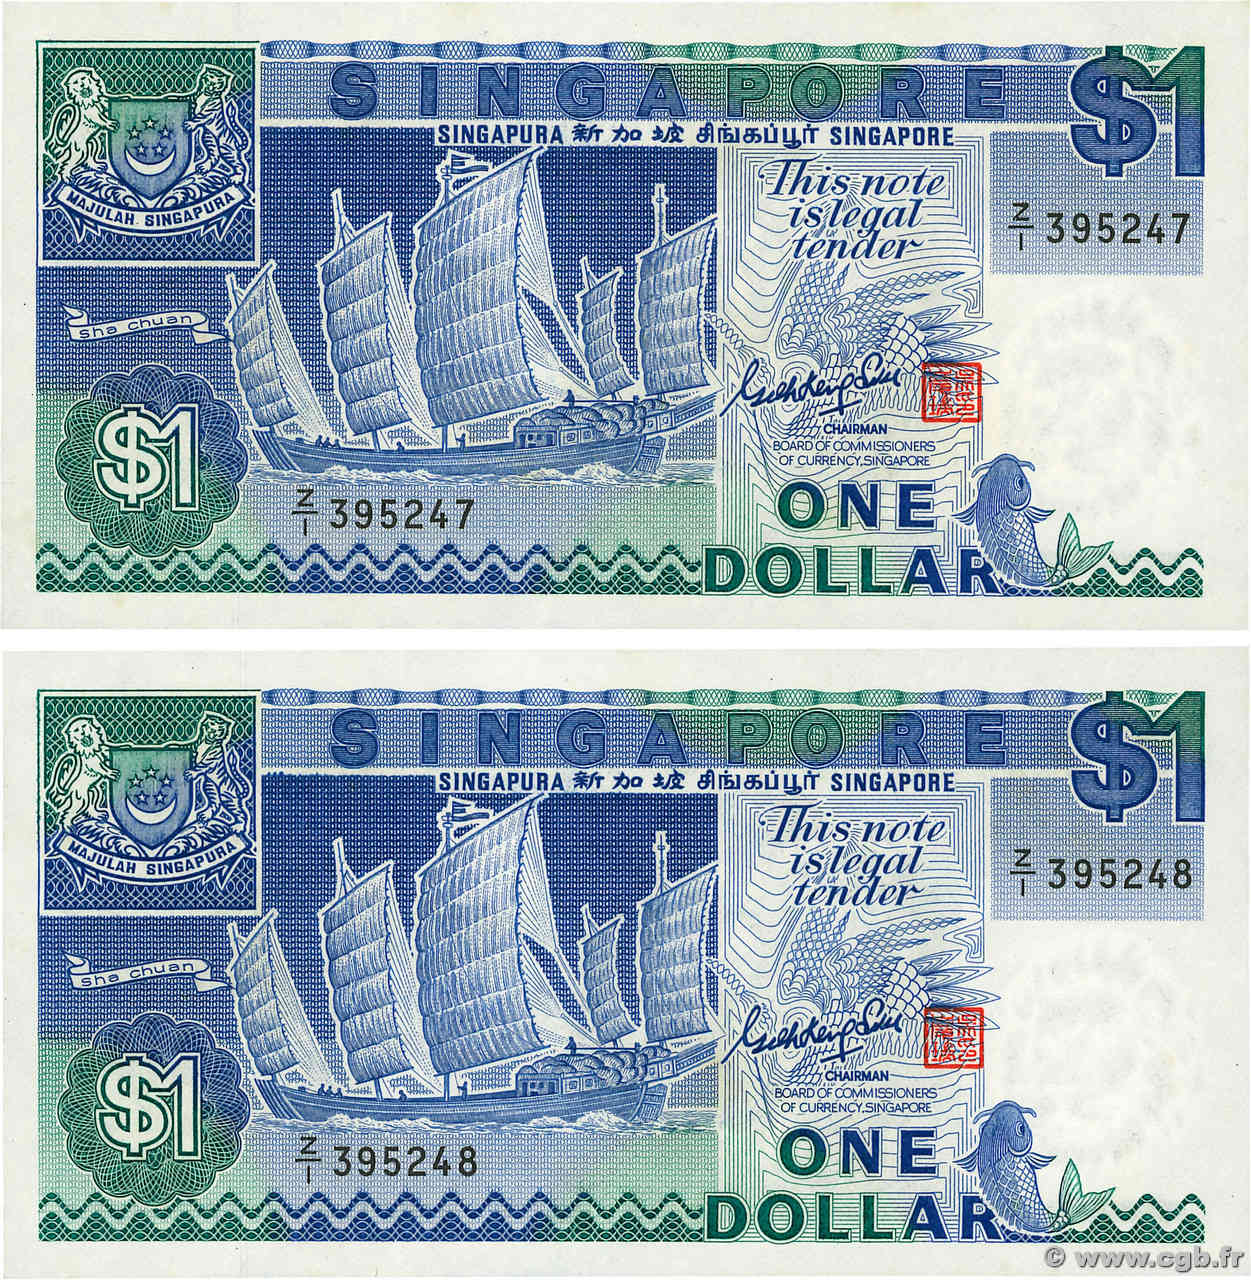 1 Dollar Remplacement SINGAPUR  1987 P.18a FDC